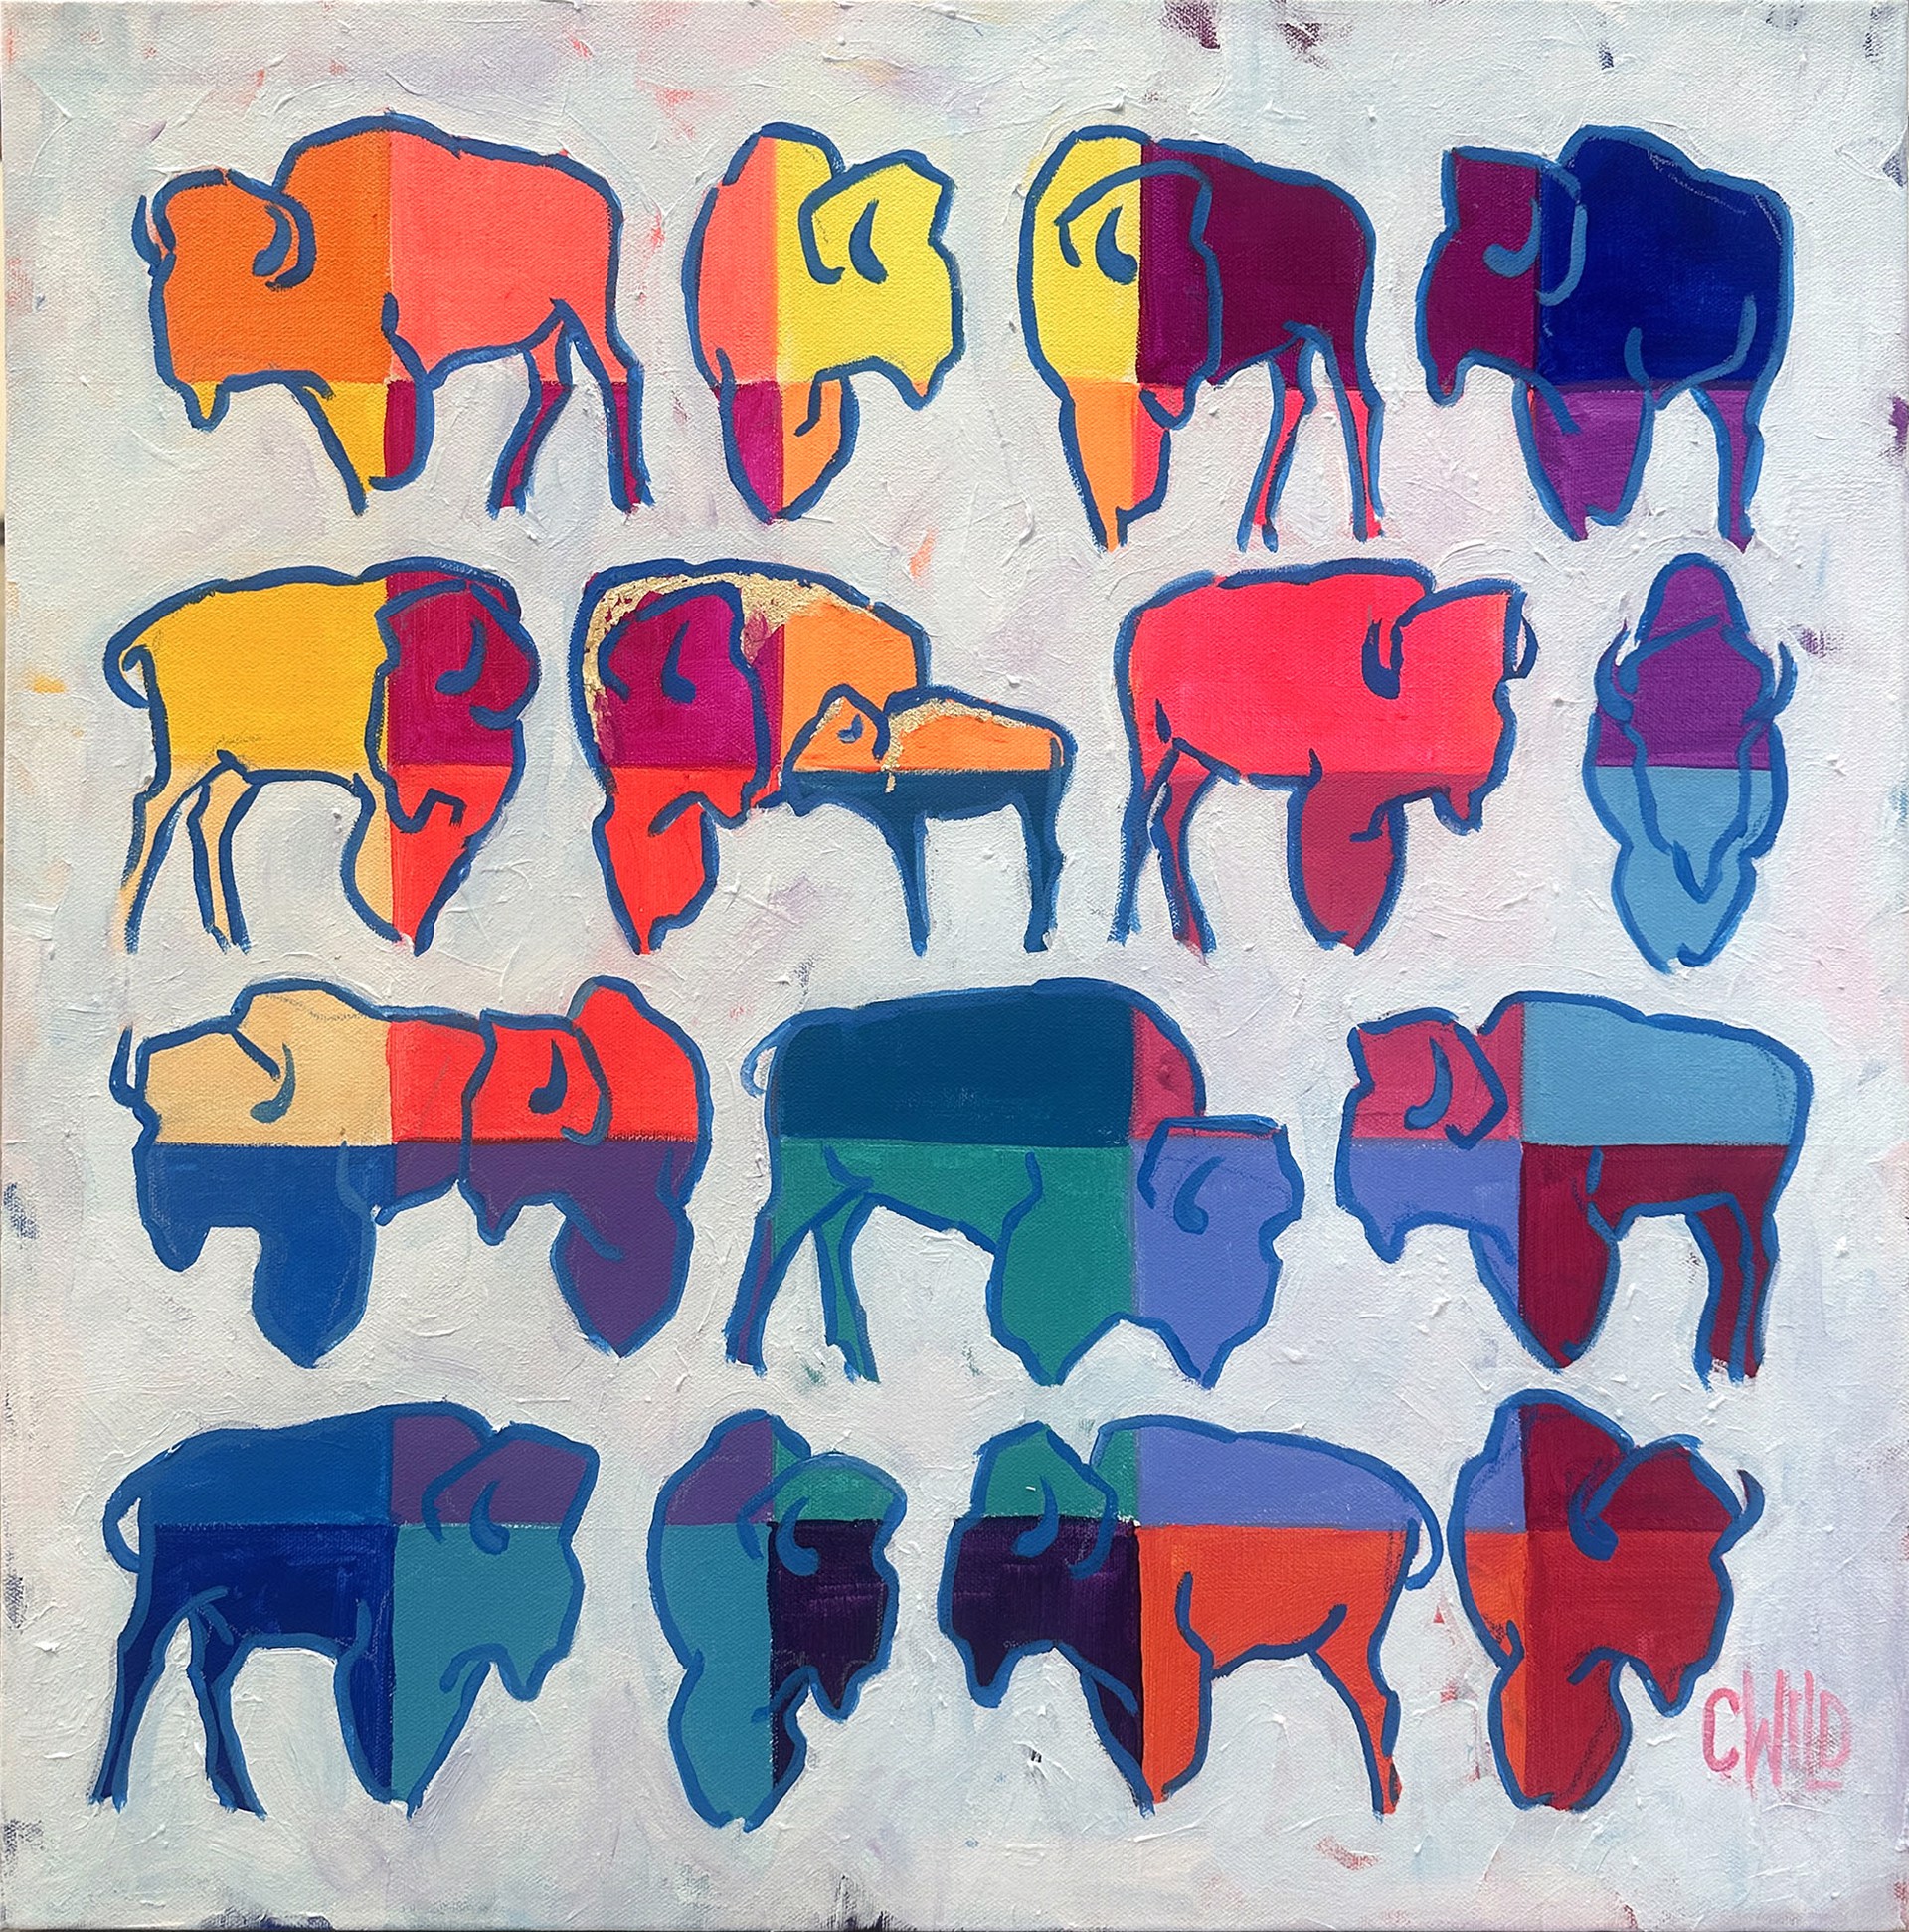 Original Acrylic Painting By Carrie Wild Featuring Rows Of Seventeen Bison In Rainbow Color Block Pattern Over White Background